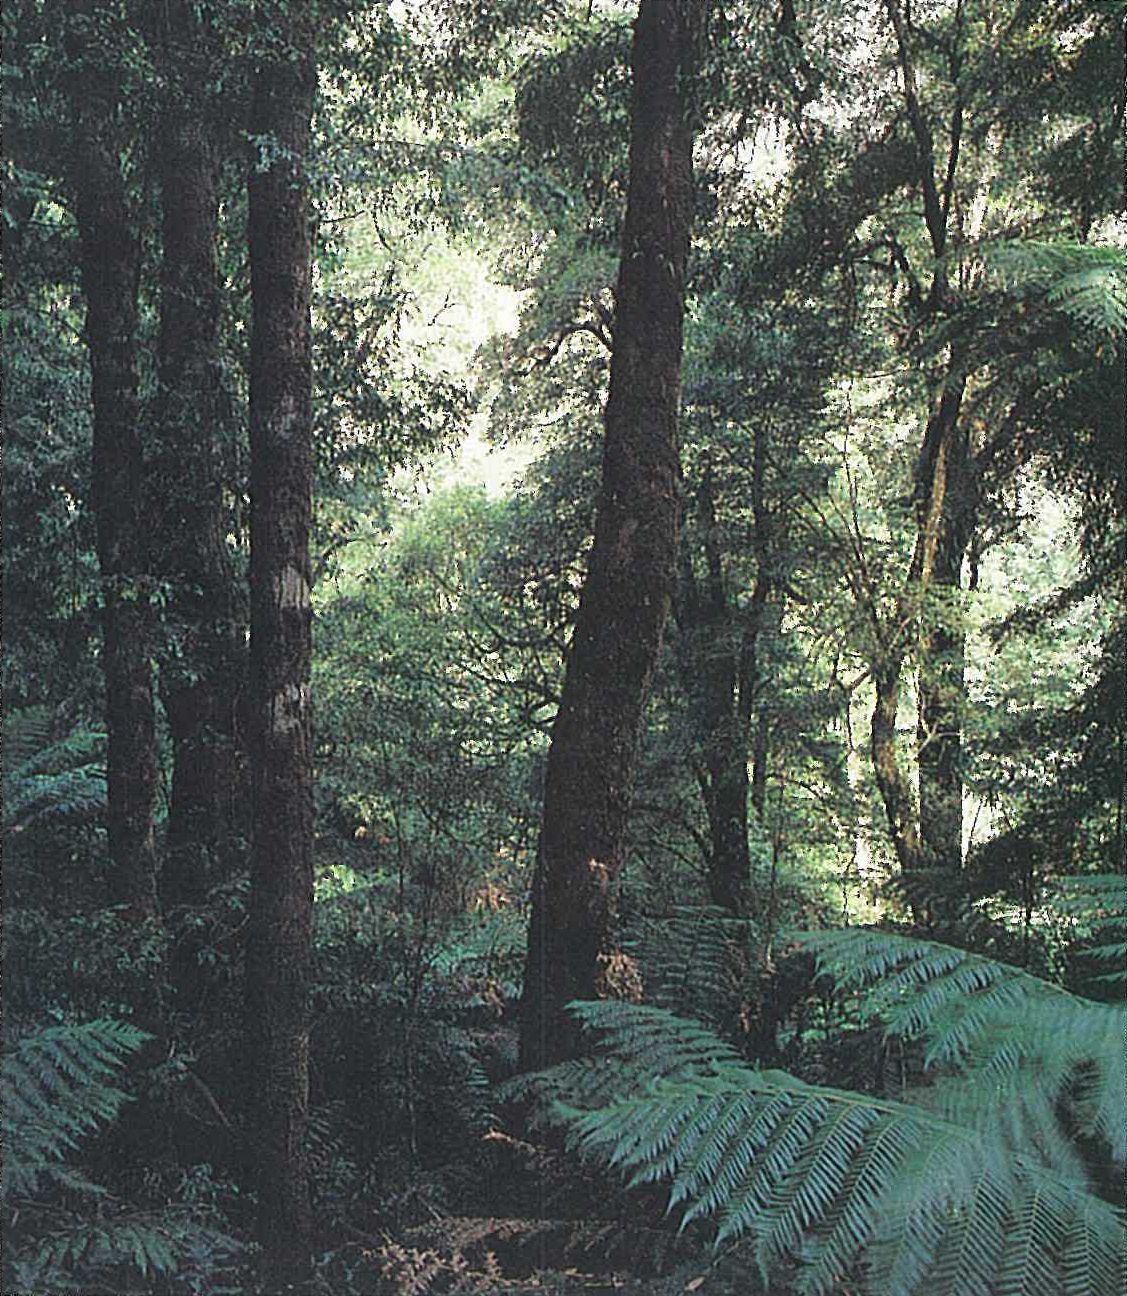 Otway Range; cool temperate rainforest. Closed-forest of Nothofagus cunninghamii, with Dicksonia antarctica. Melba Gully area.